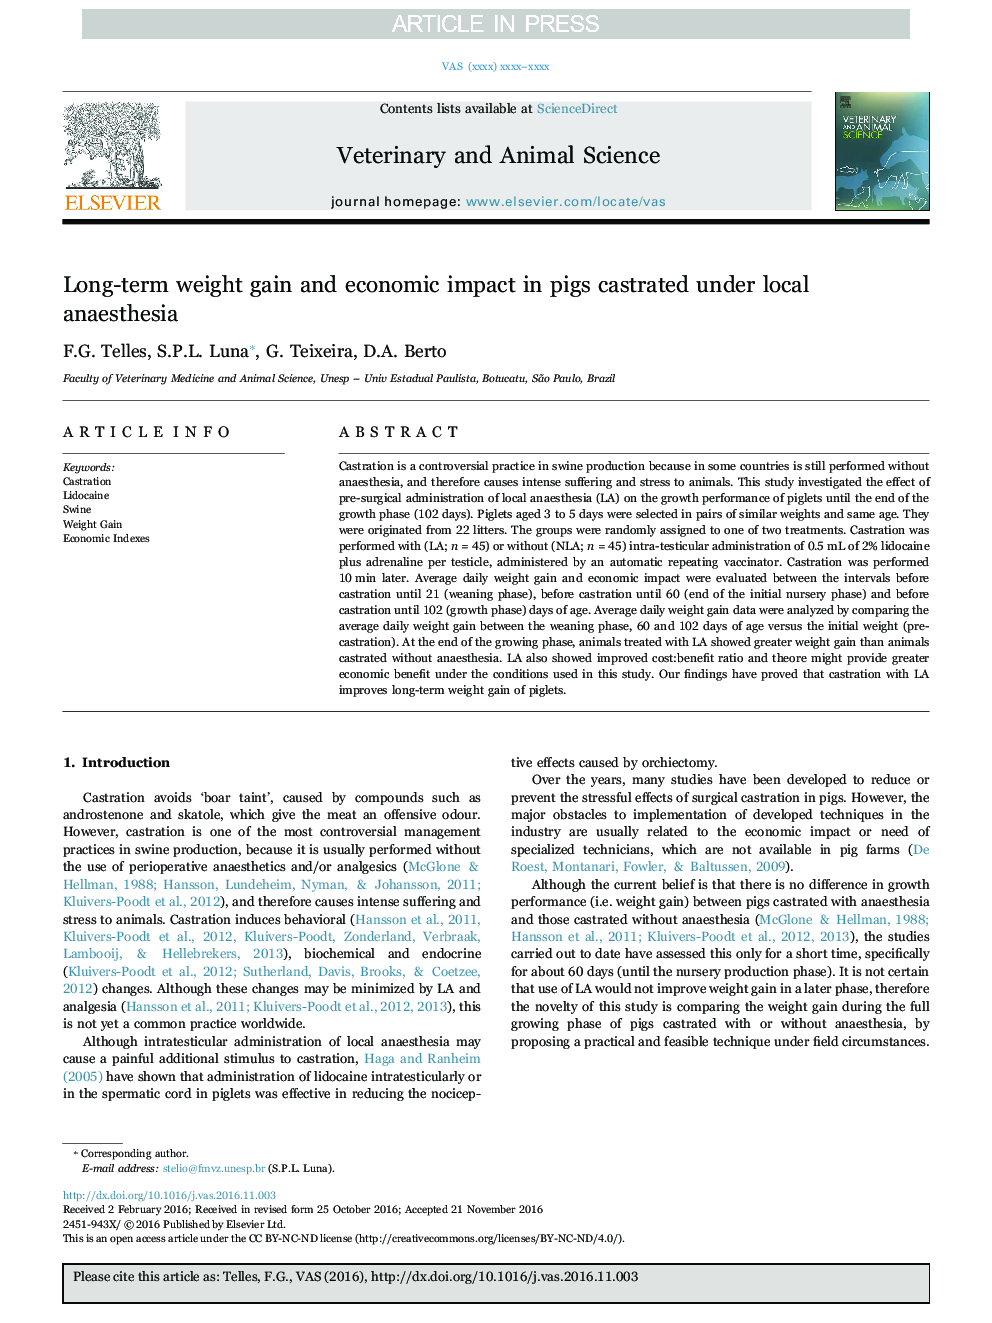 Long-term weight gain and economic impact in pigs castrated under local anaesthesia